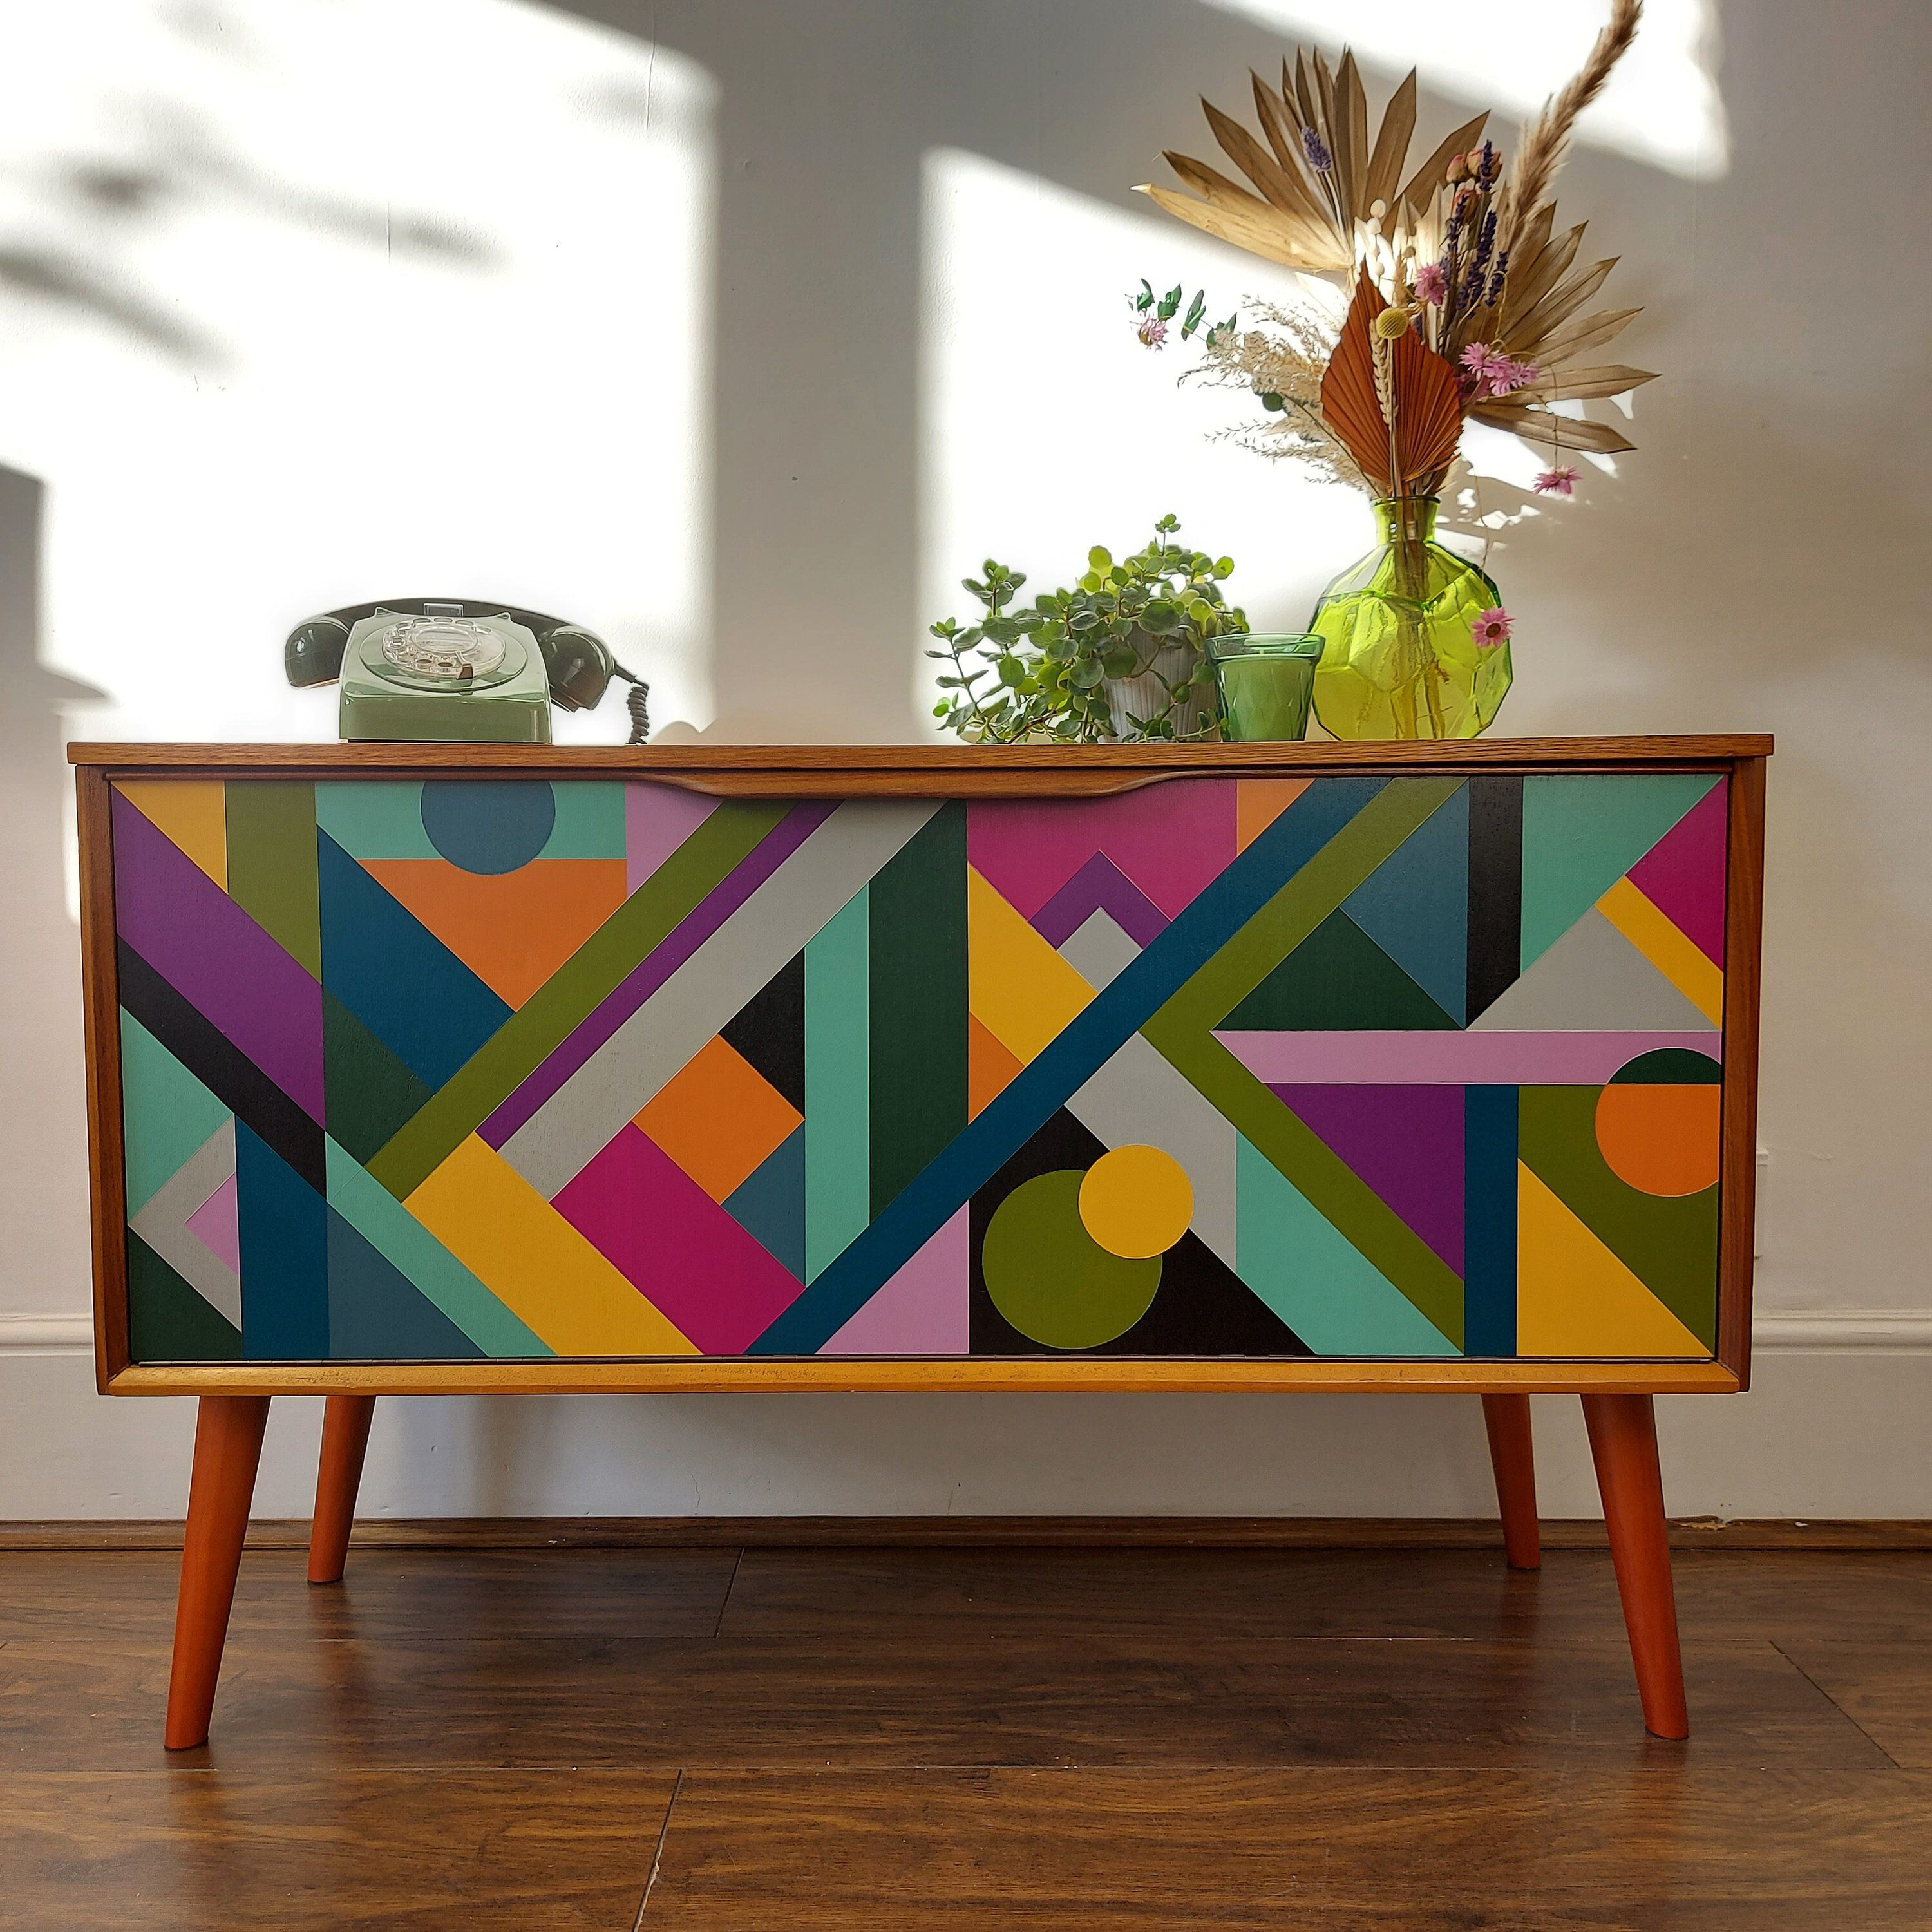 Sold Geometric Sideboard Hand Painted Credenza Up Cycled – Etsy With Regard To Geometric Sideboards (View 5 of 15)